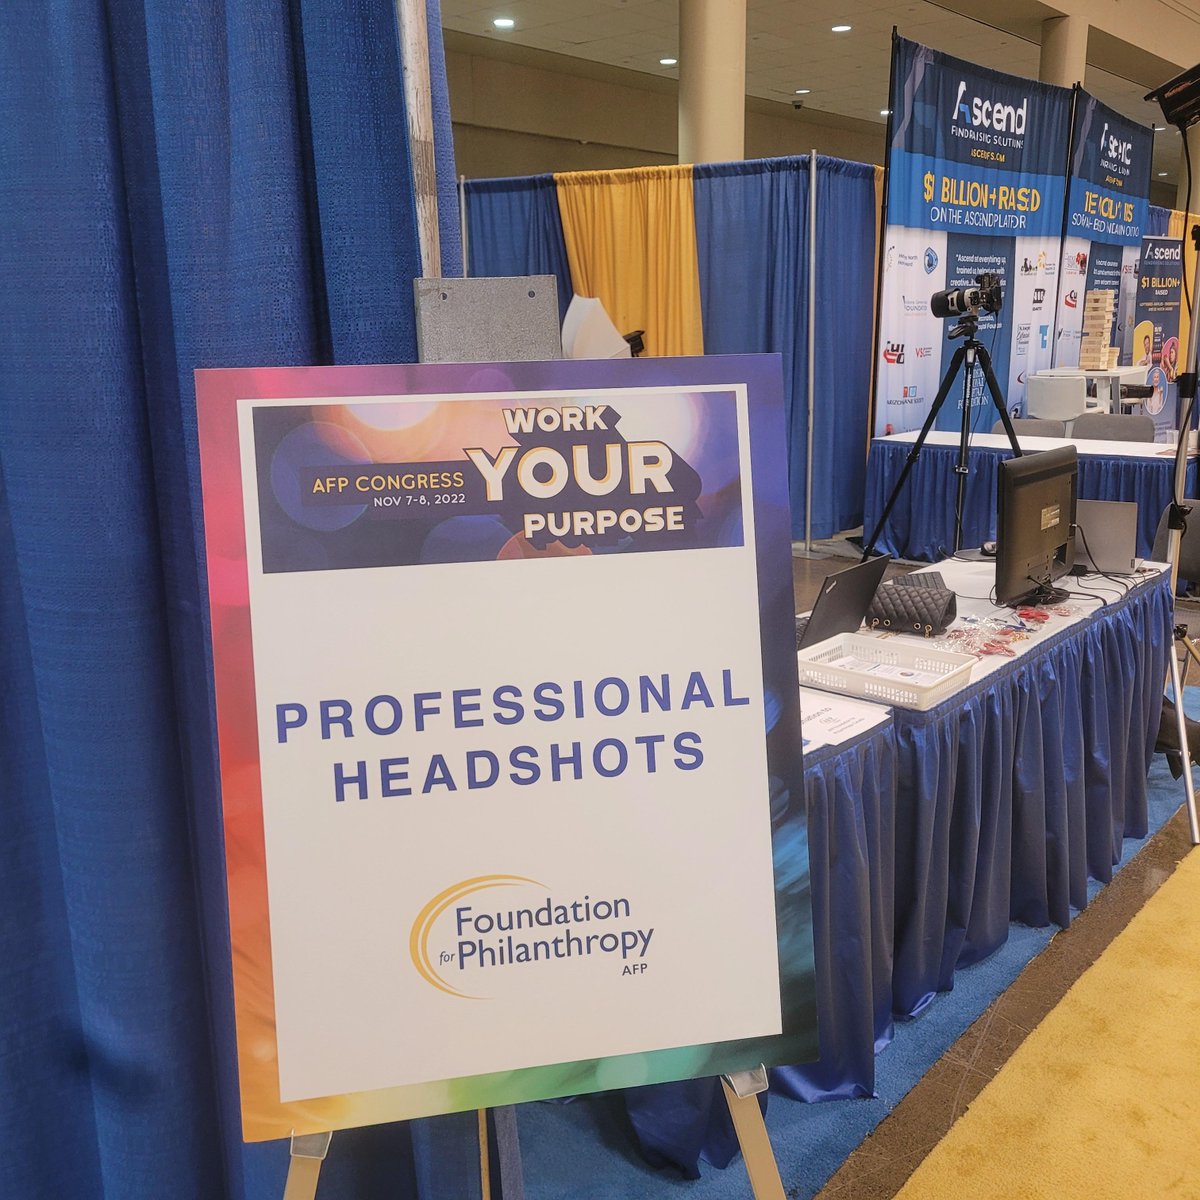 Good morning #AFPCONGRESS Come say hi to us at the AFP Foundation for Philanthropy- Canada booth and while you are here get an updated professional headshot photo!